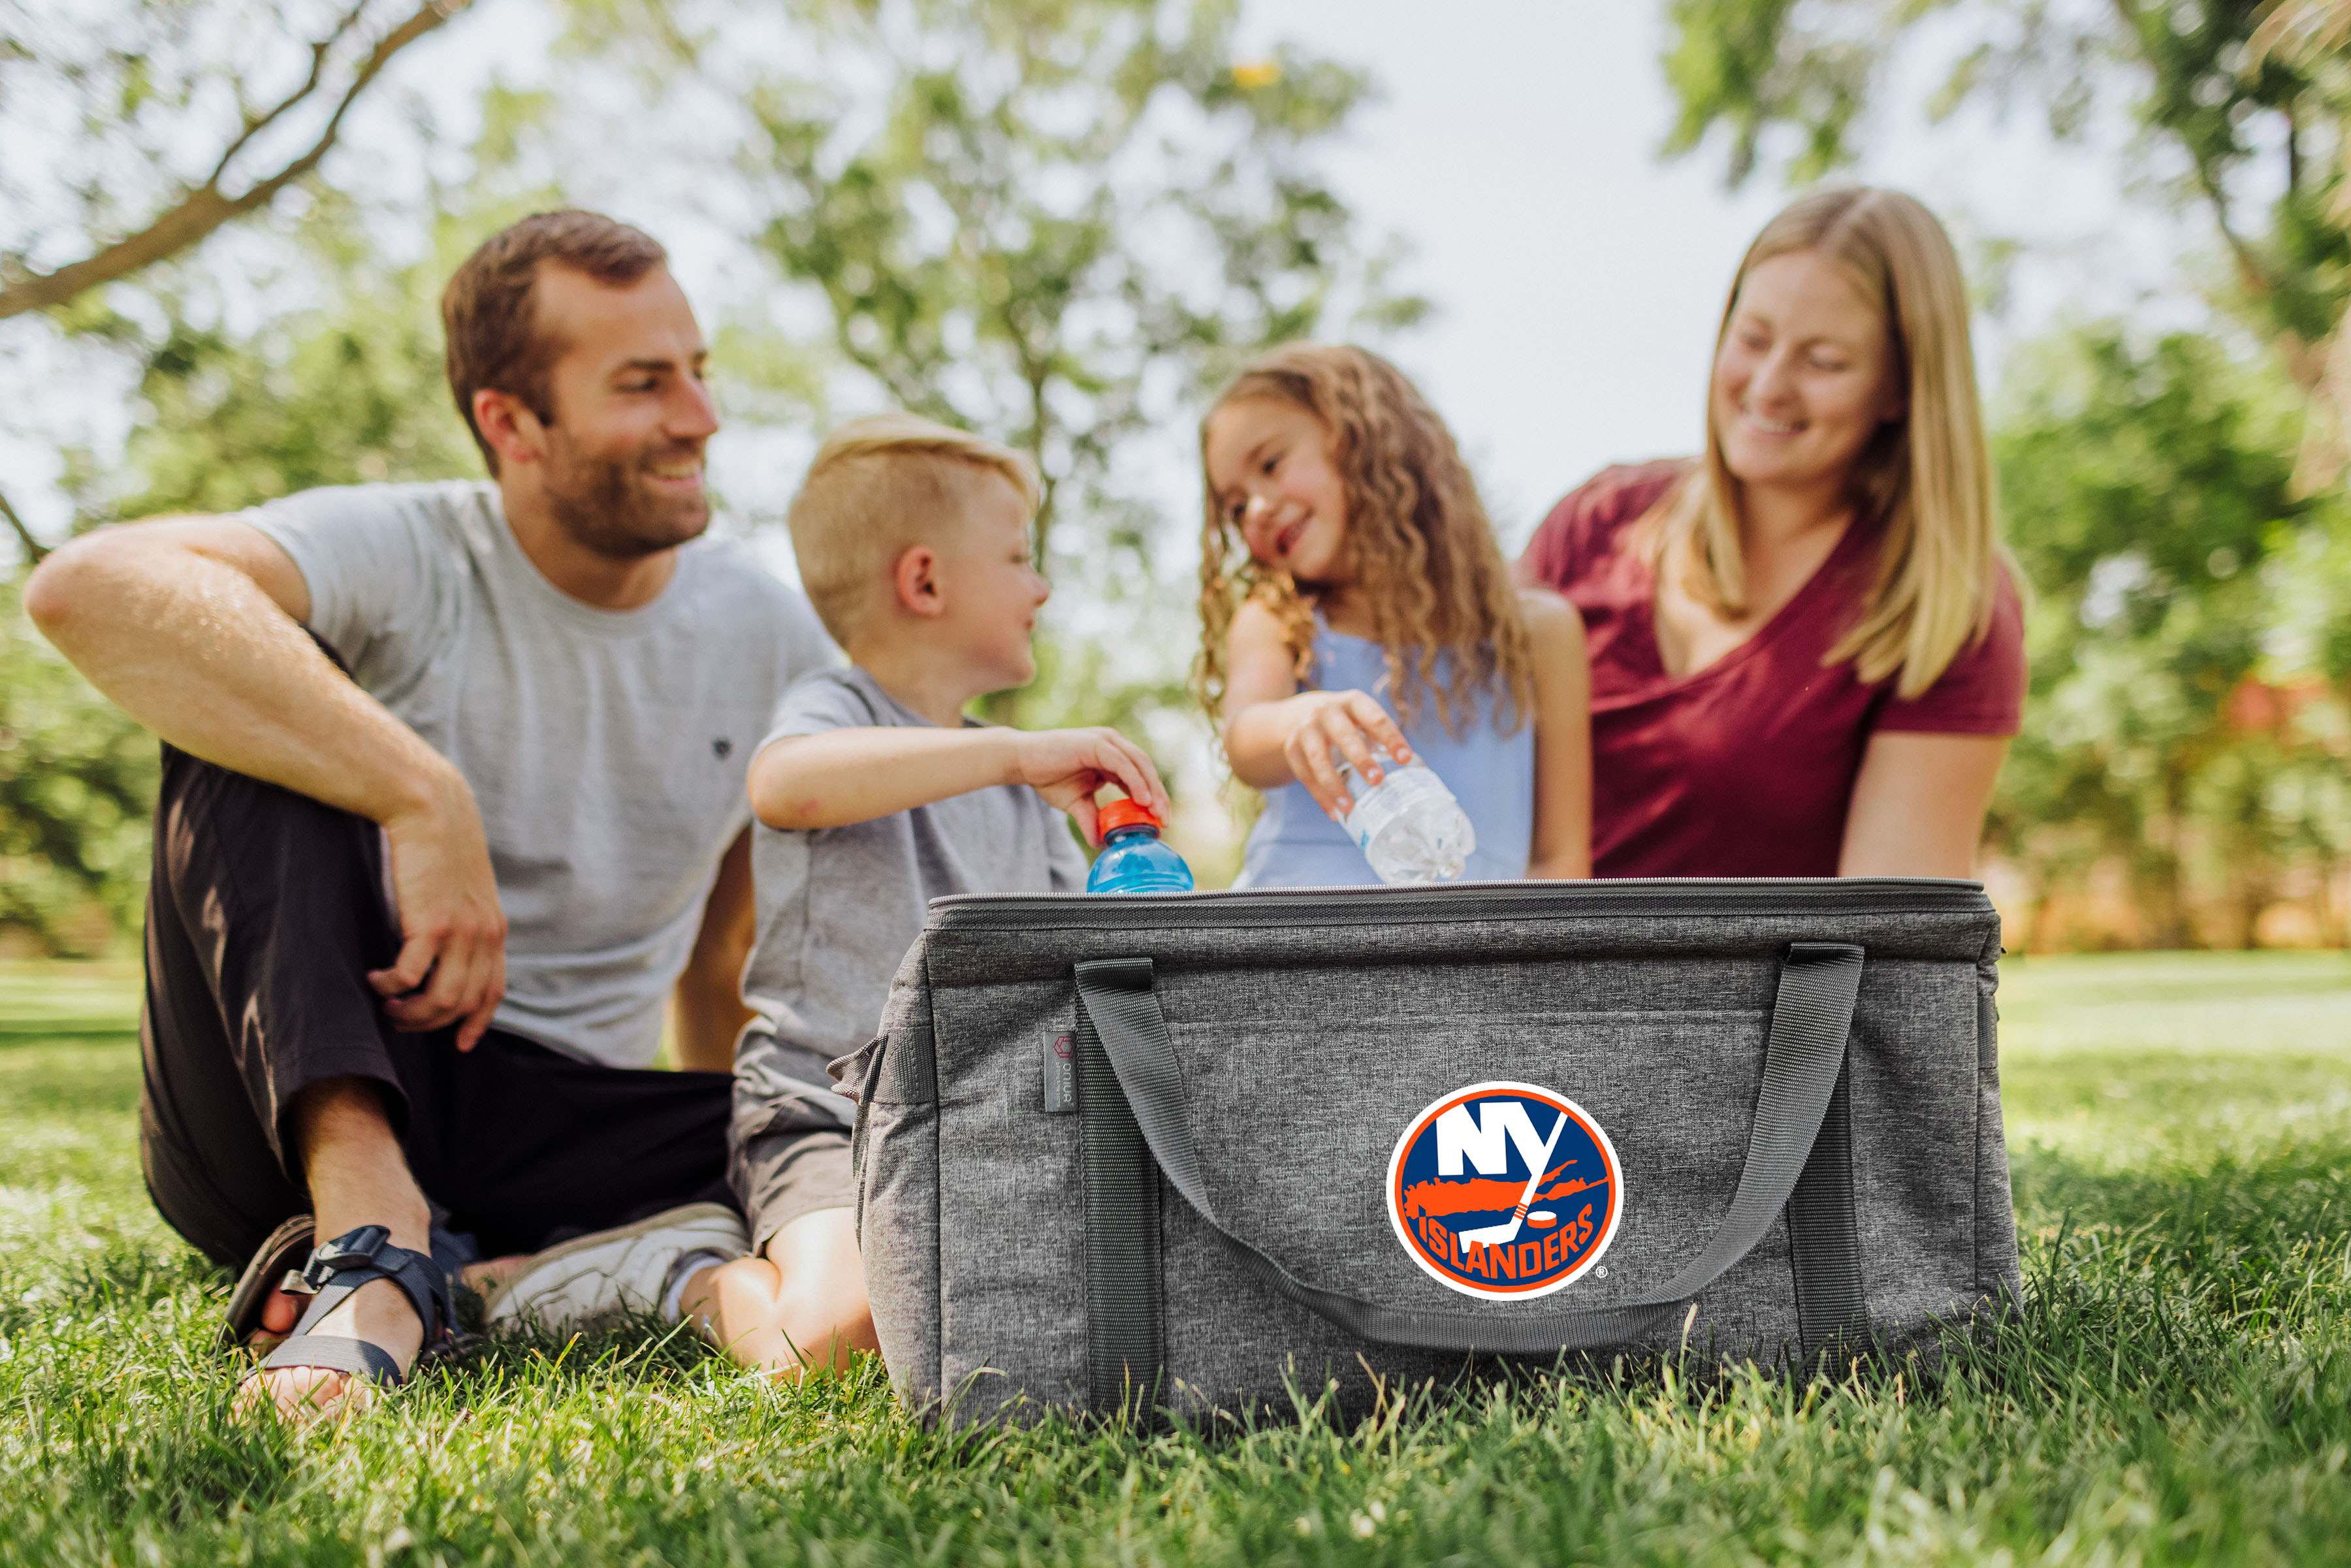 New York Islanders - 64 Can Collapsible Cooler